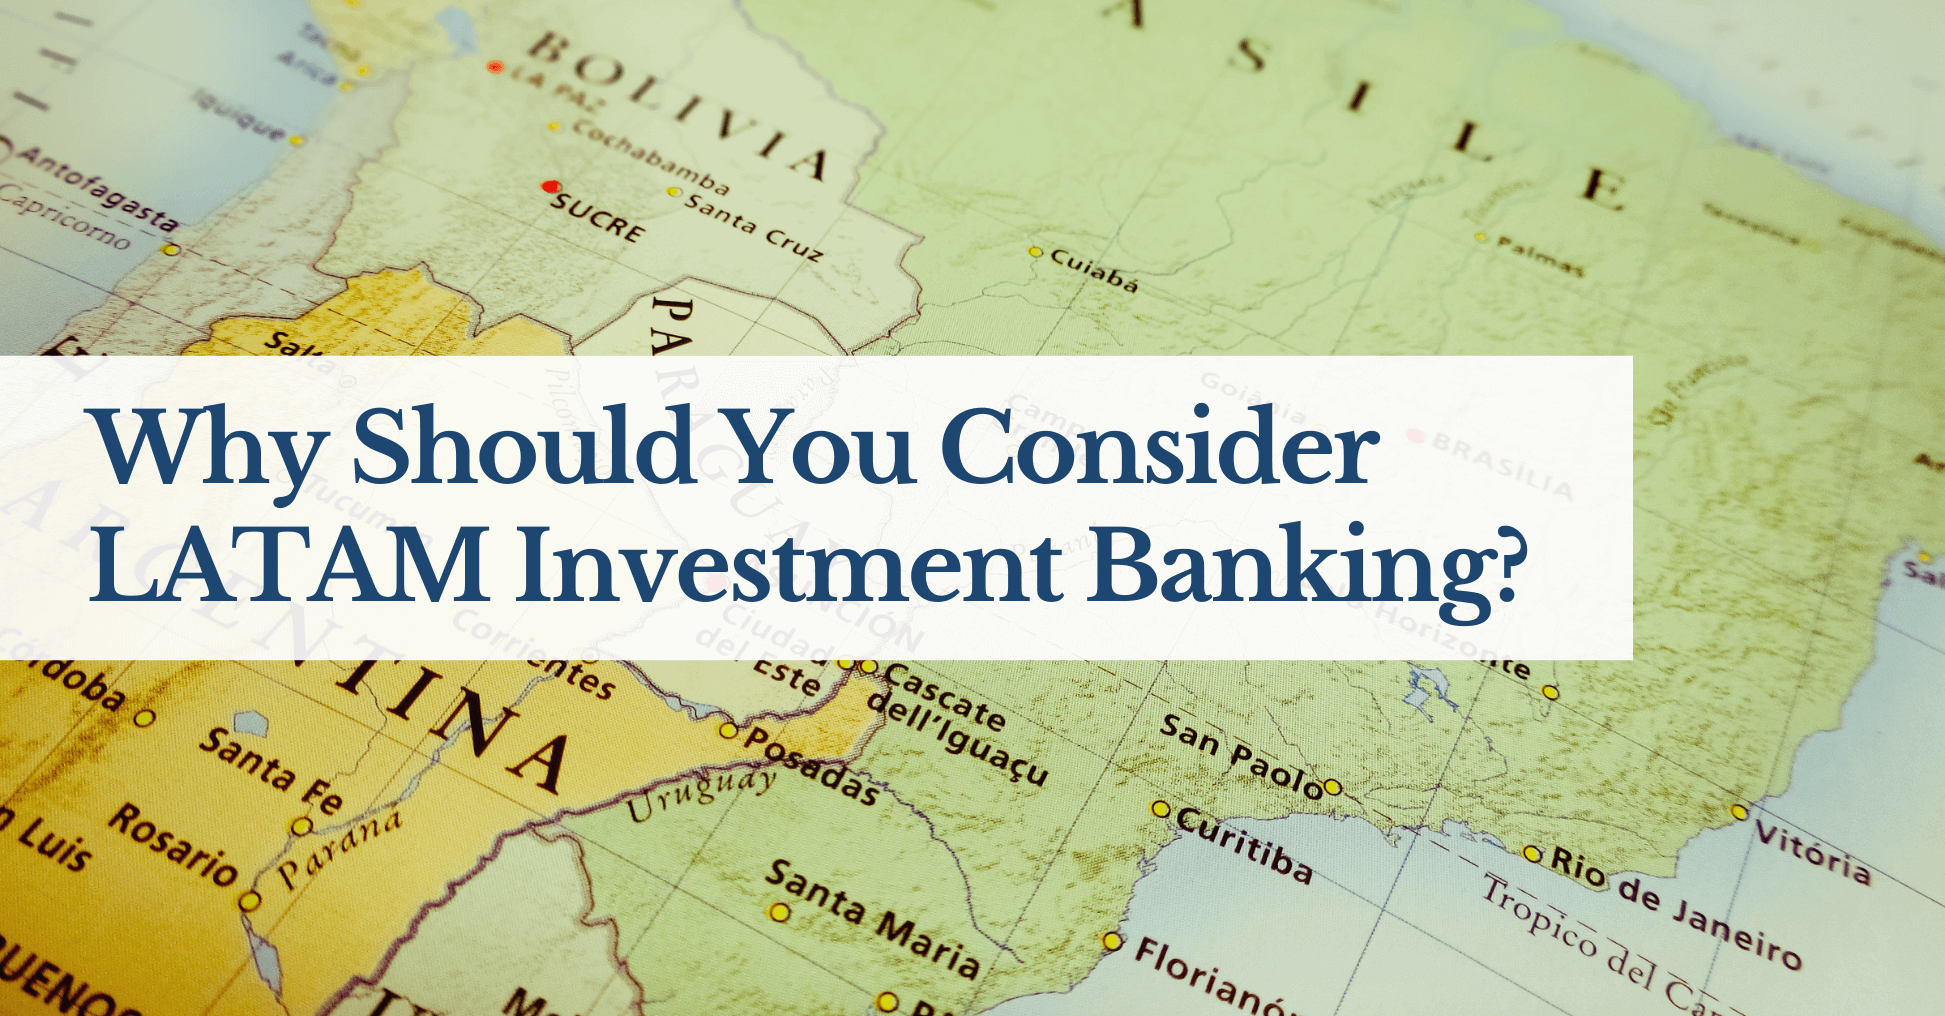 Why Should You Consider LATAM Investment Banking?